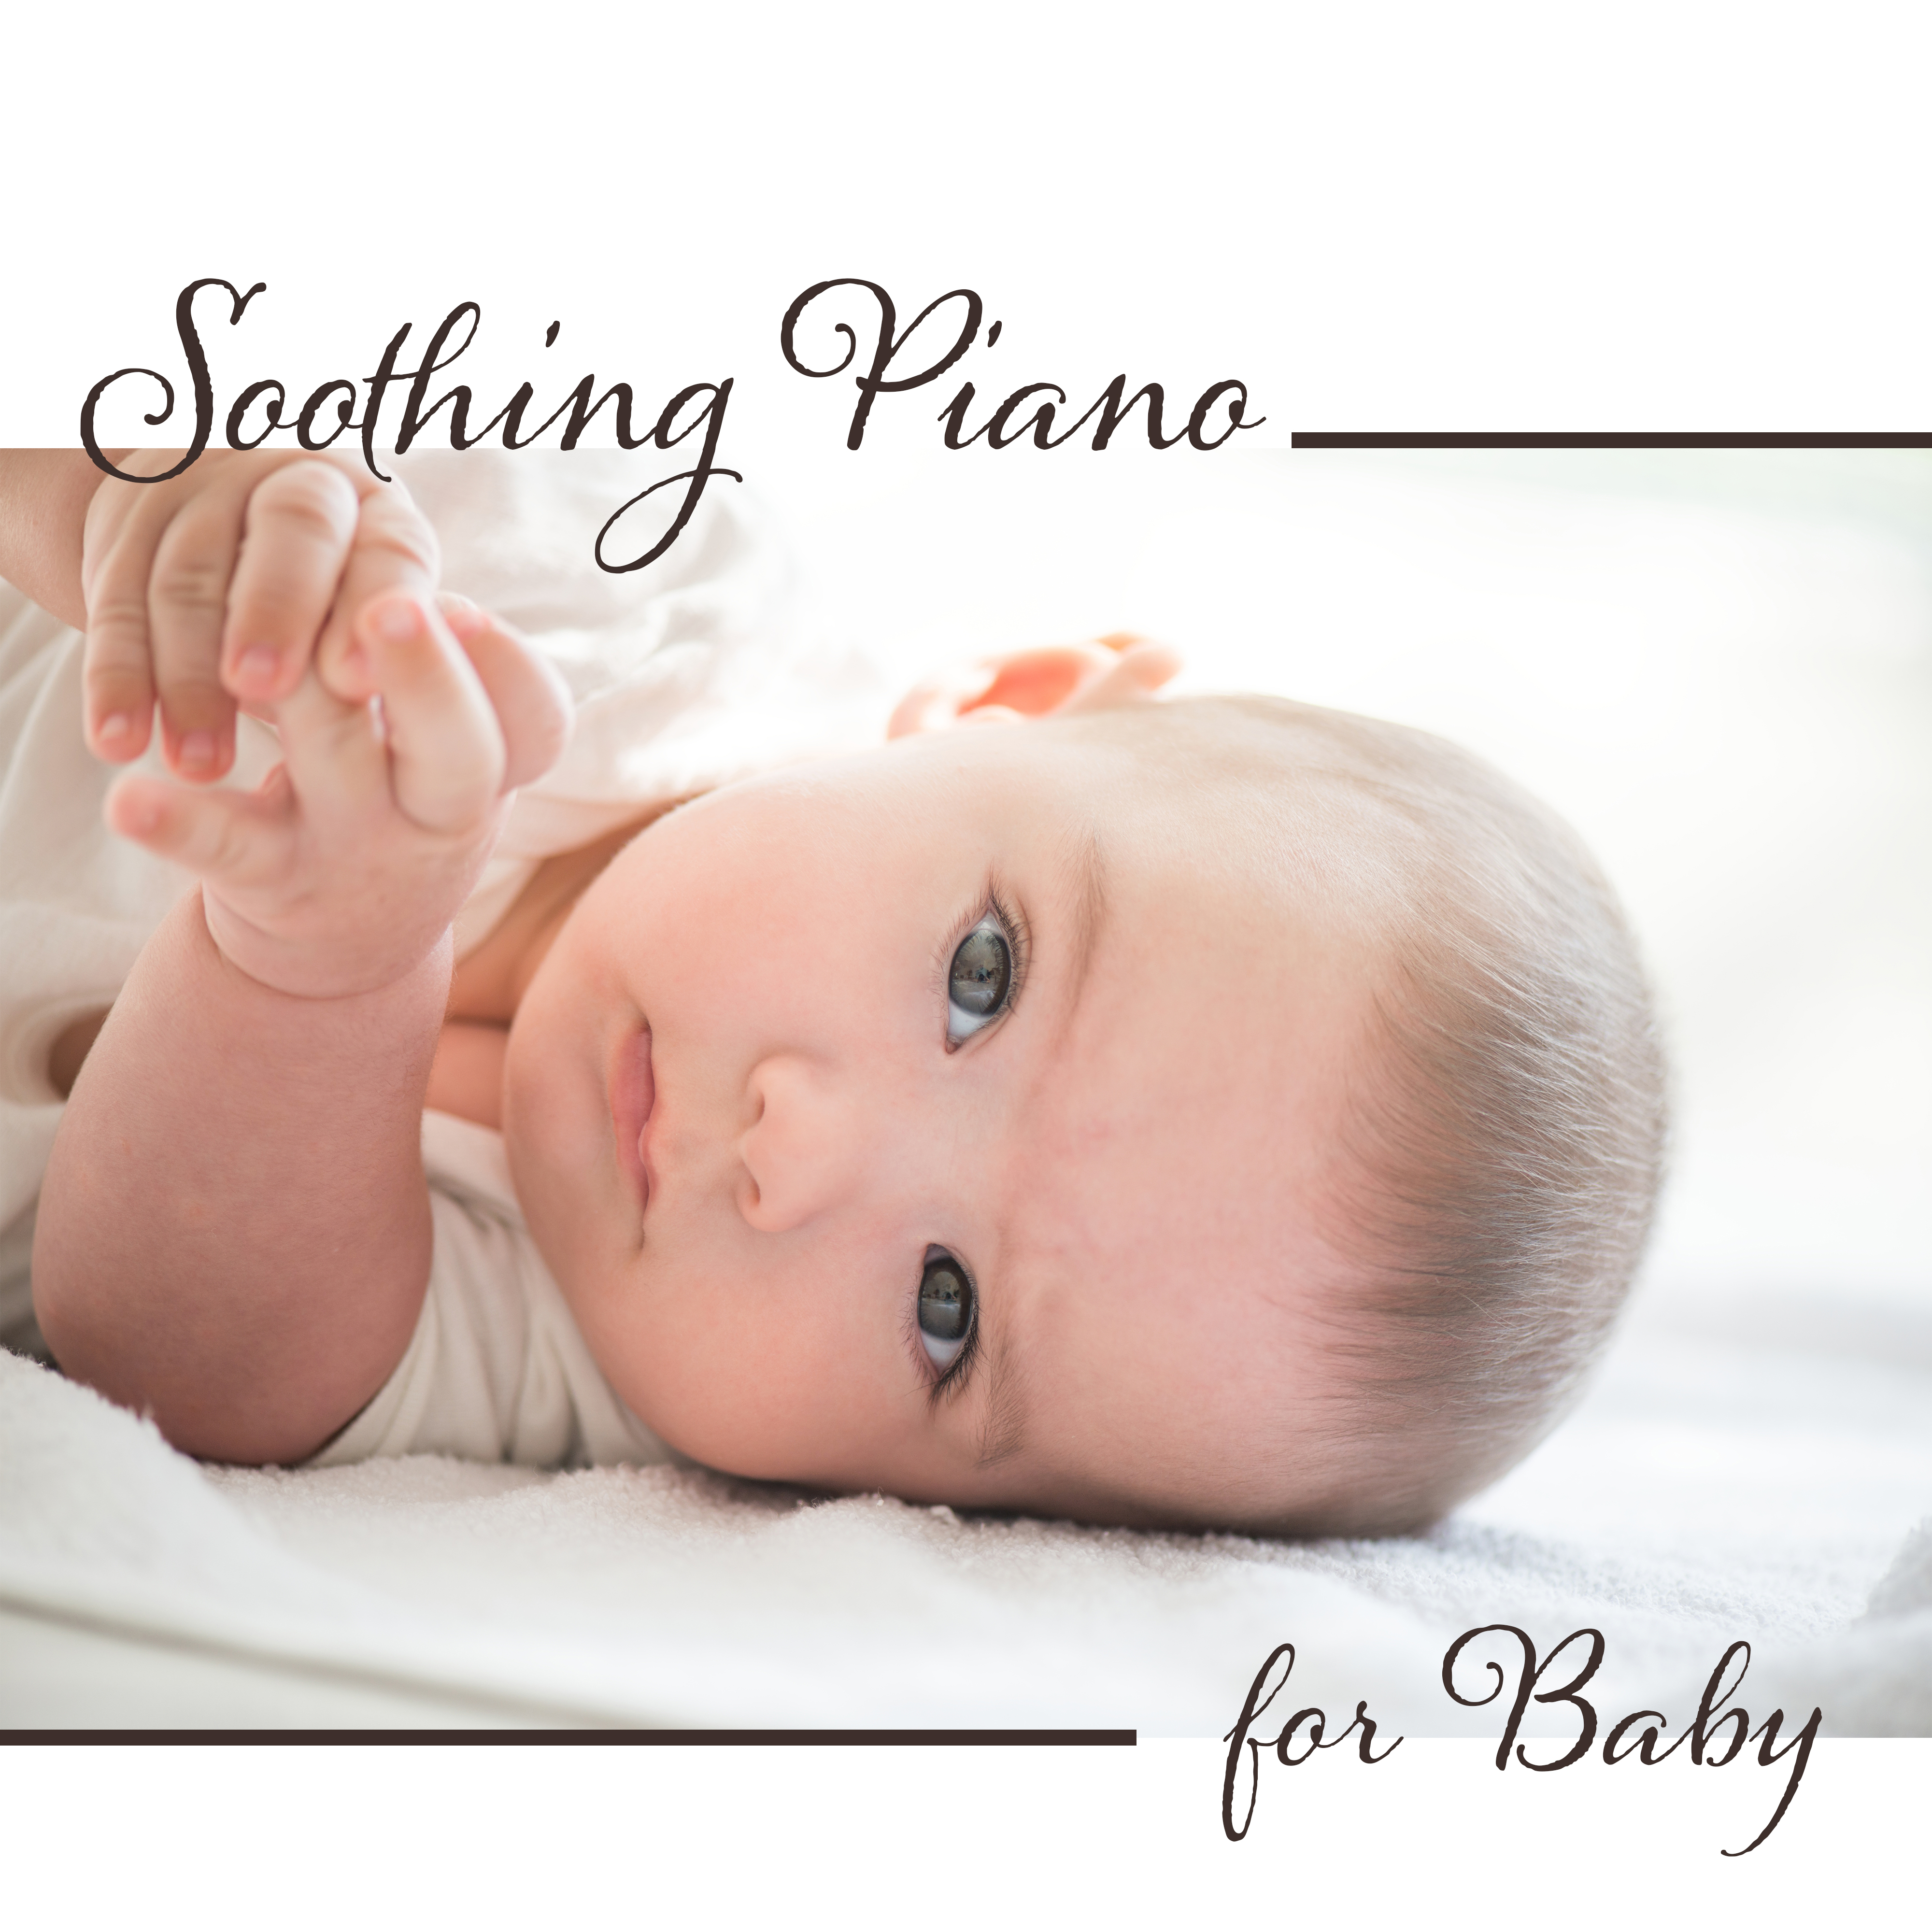 Soothing Piano for Baby – Sweet Dreams, Healing Lullabies for Sleep, Relaxation Bedtime, Classical Melodies for Kids, Mozart, Beethoven